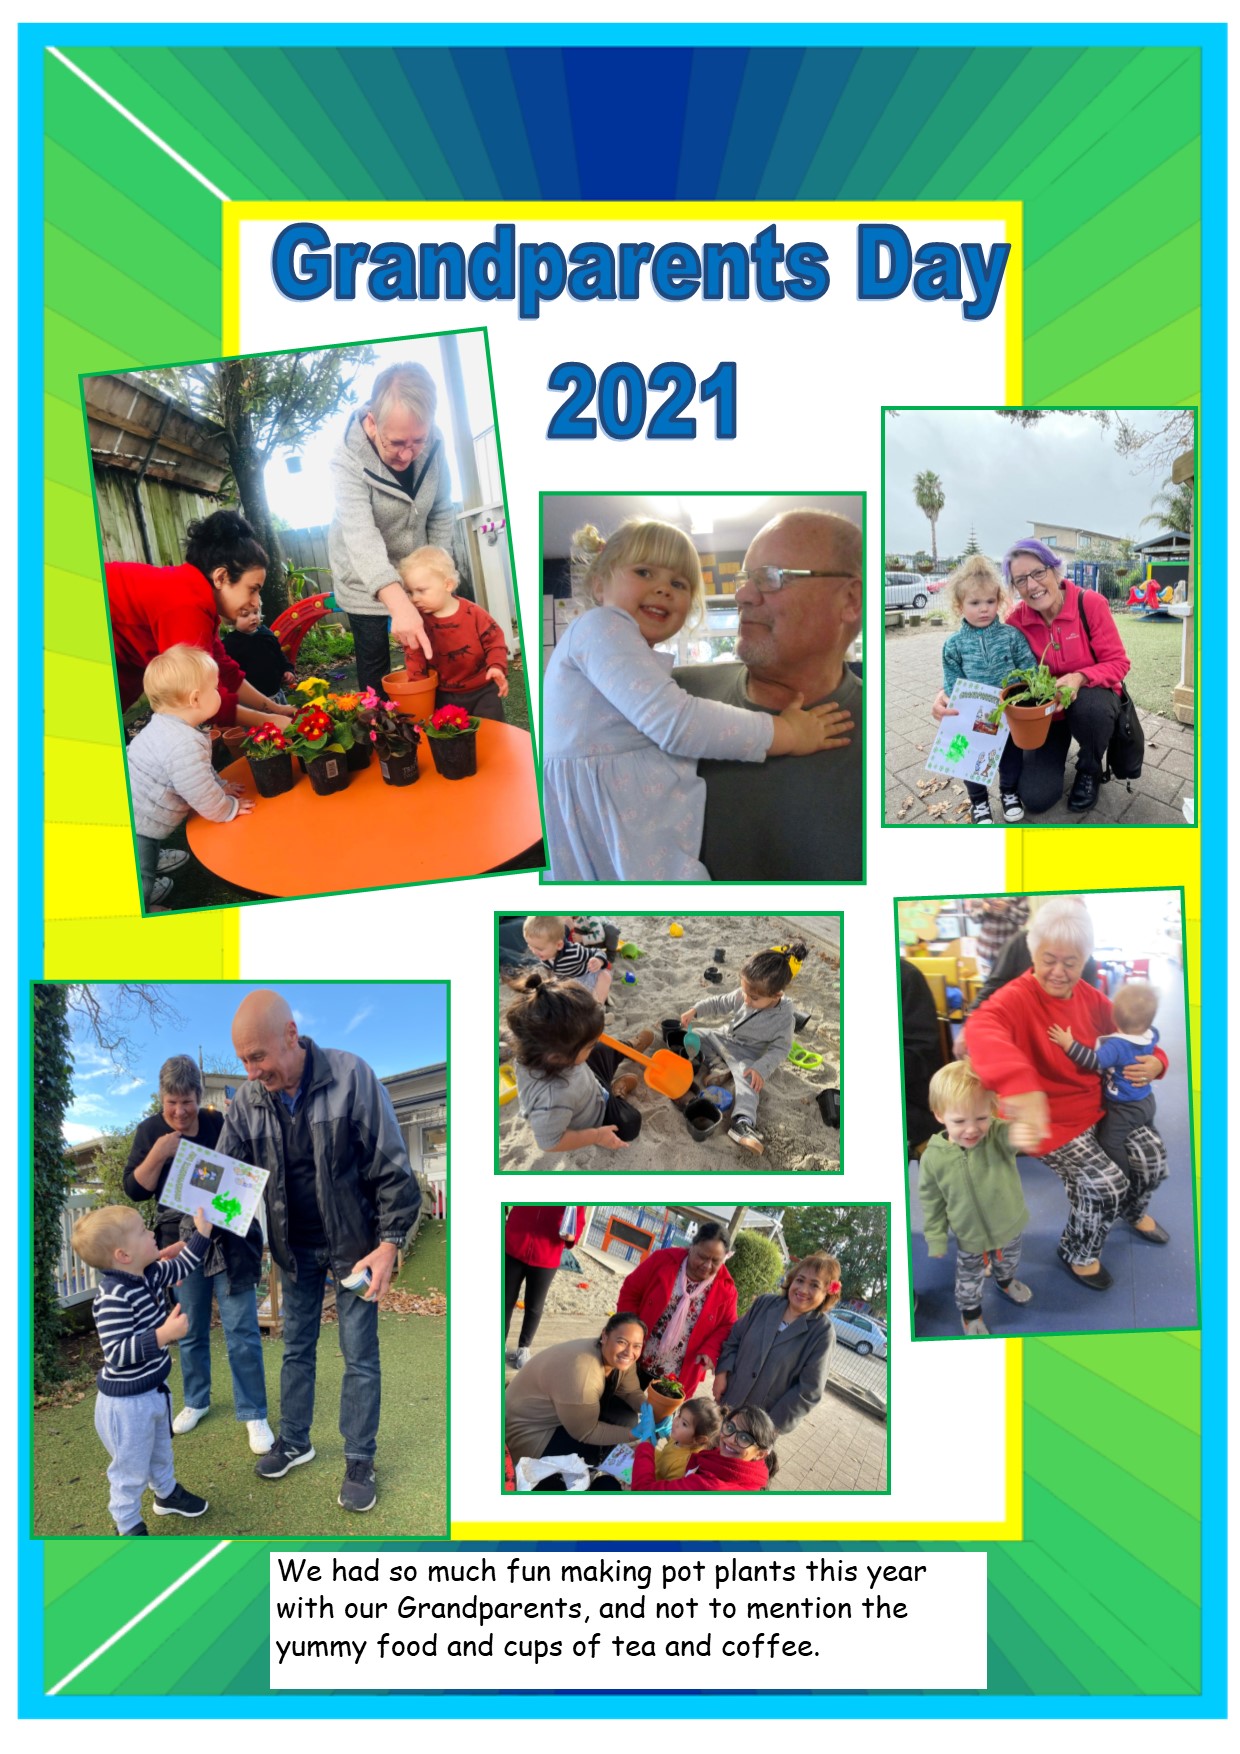 grandparents_day_web_page_2021.jpg